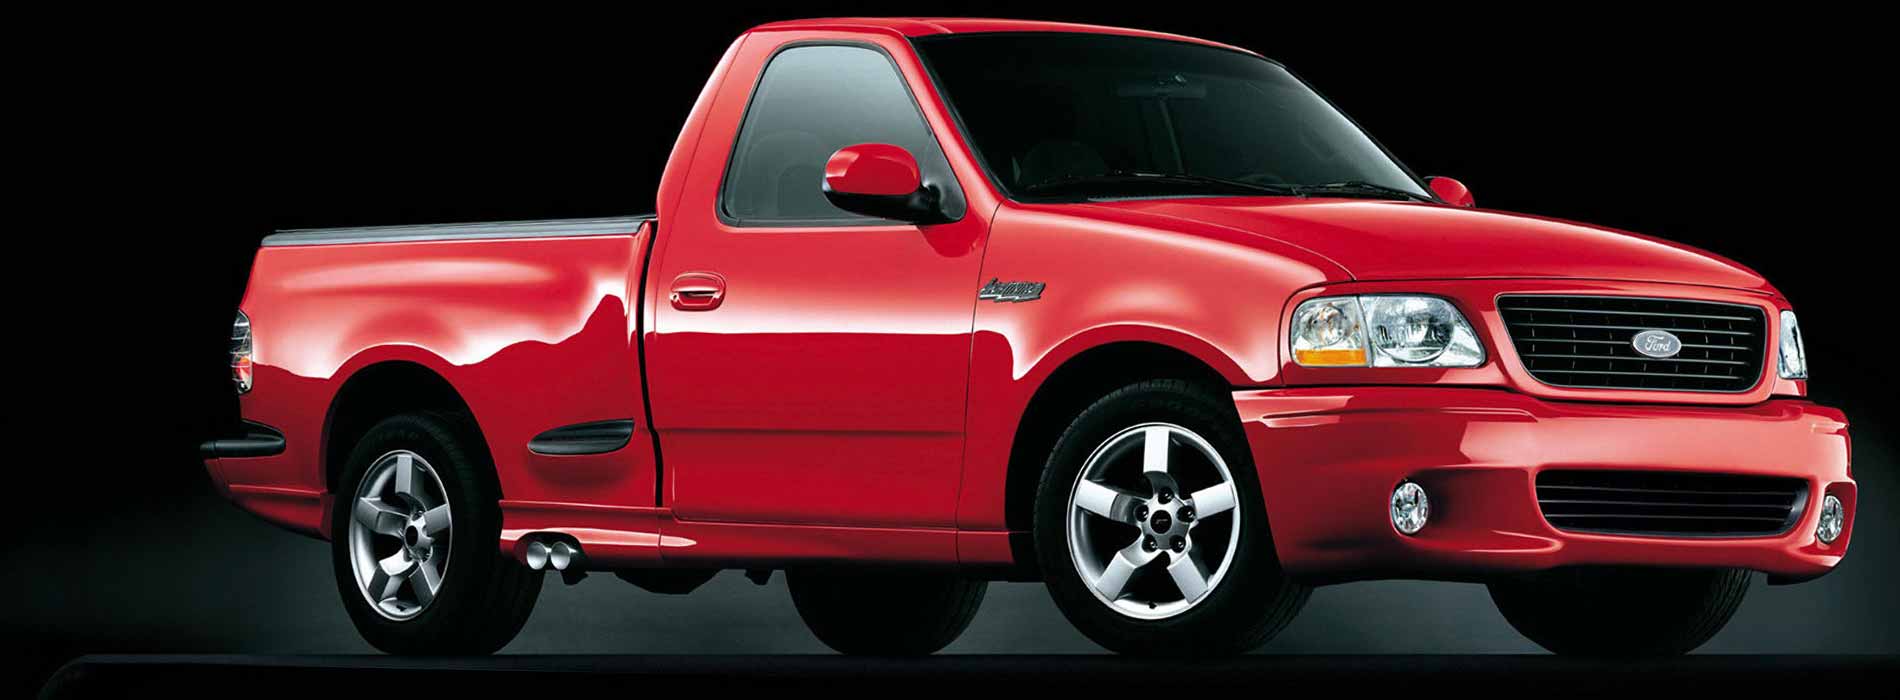 Ford F-150 SVT Lightning 2003 | Specs and information | DNA Collectibles